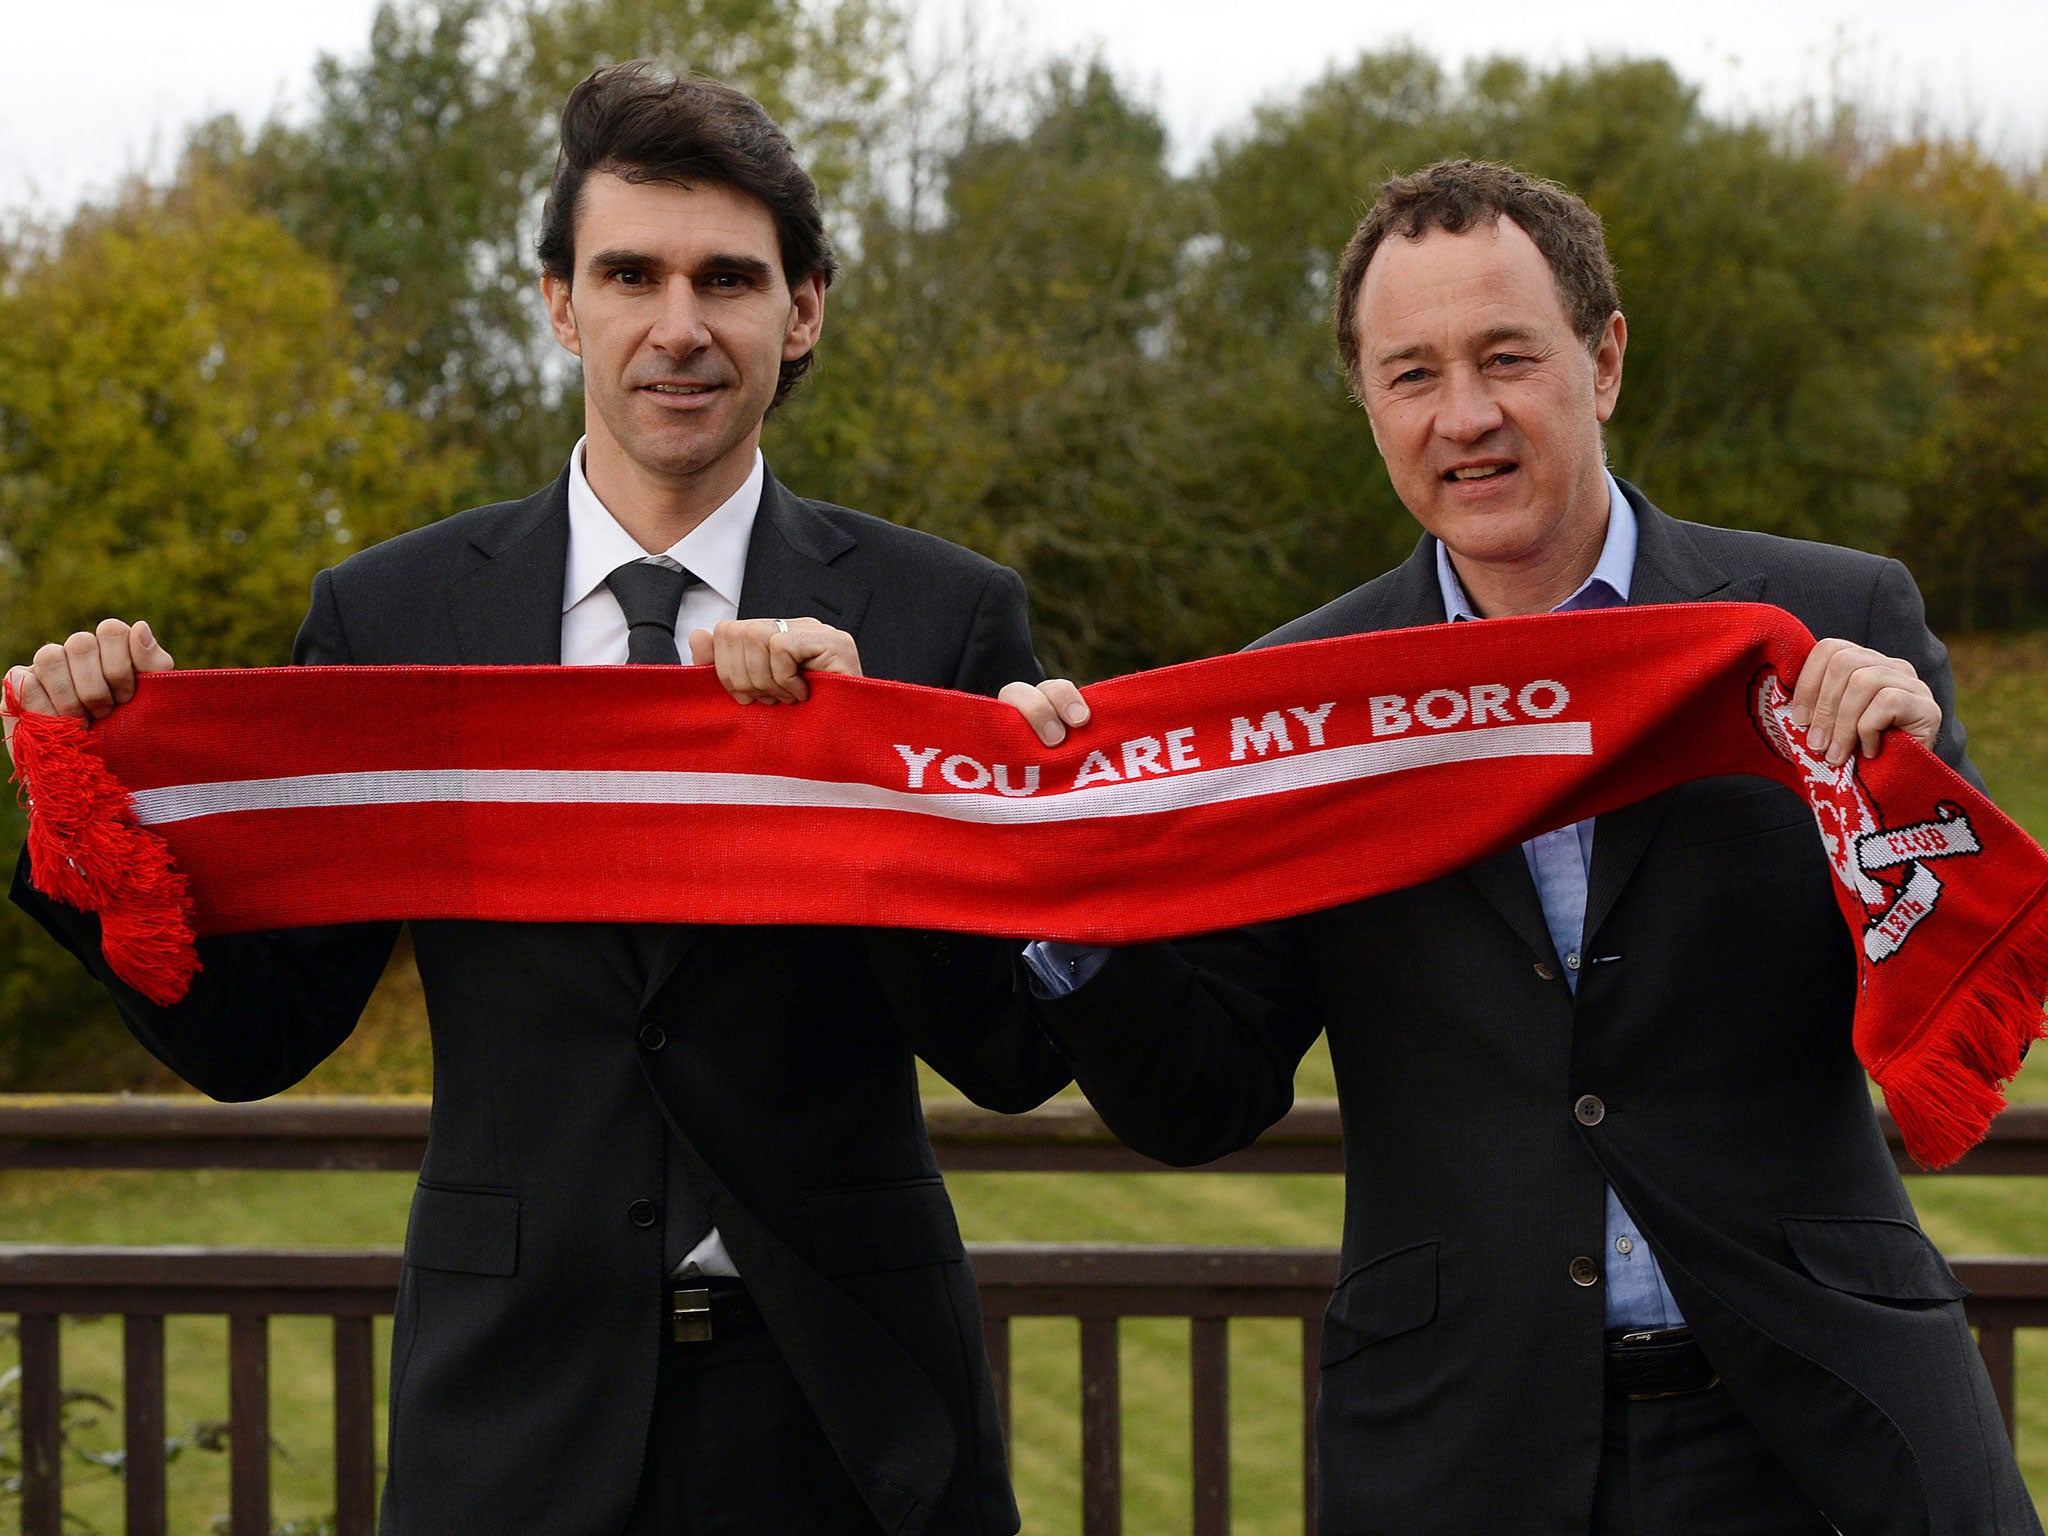 New Middlesbrough manager Aitor Karanka and chairman Steve Gibson